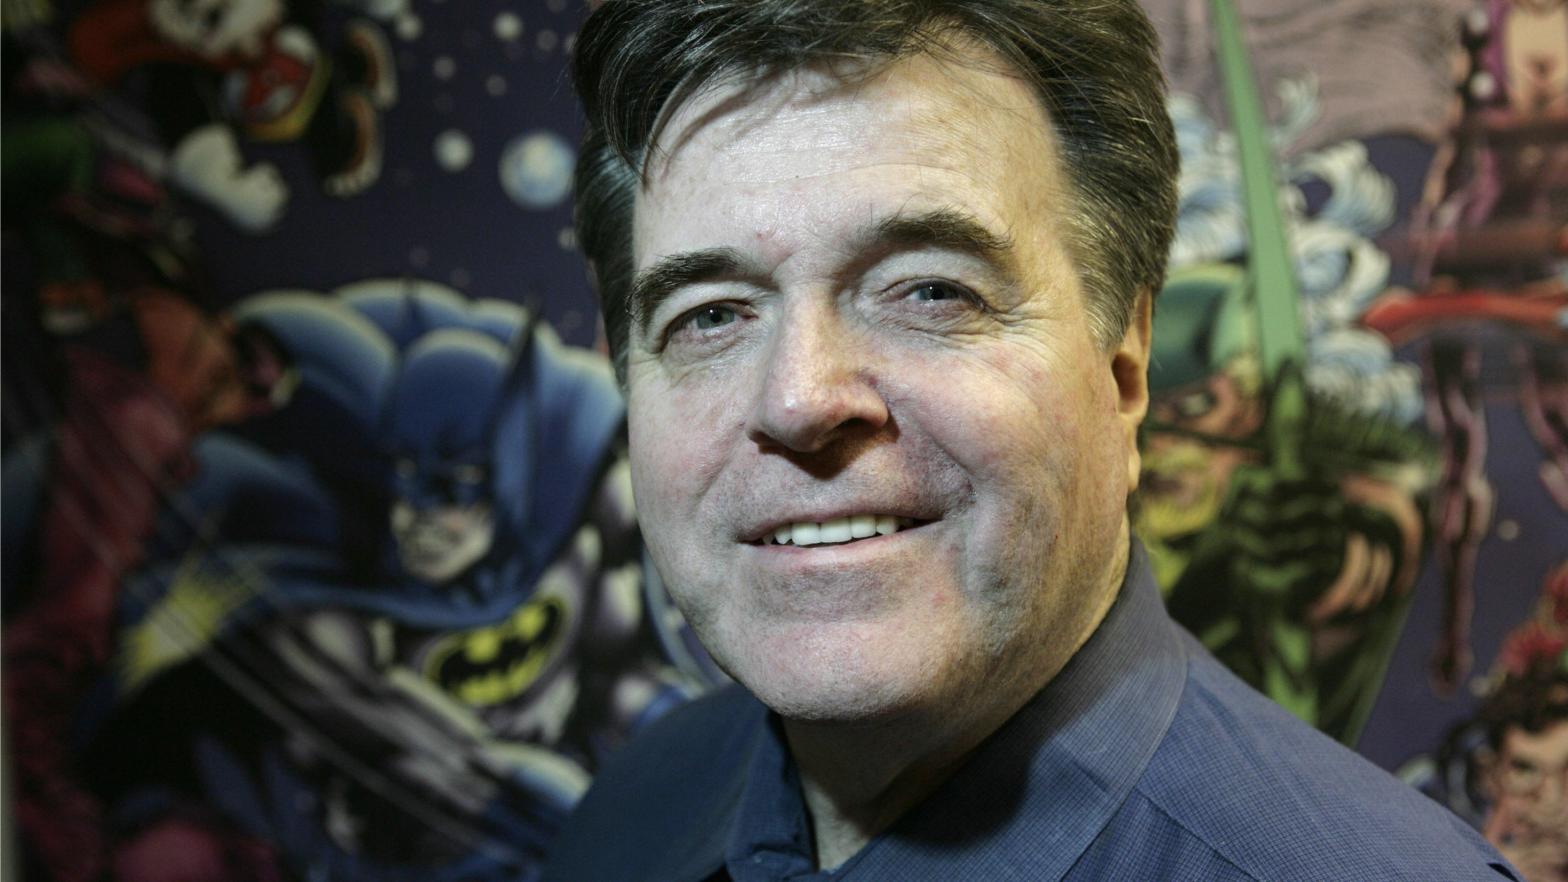 Neal Adams in his Continuity Studios office in New York City in 2008. (Photo: Nicholas Roberts/AFP)